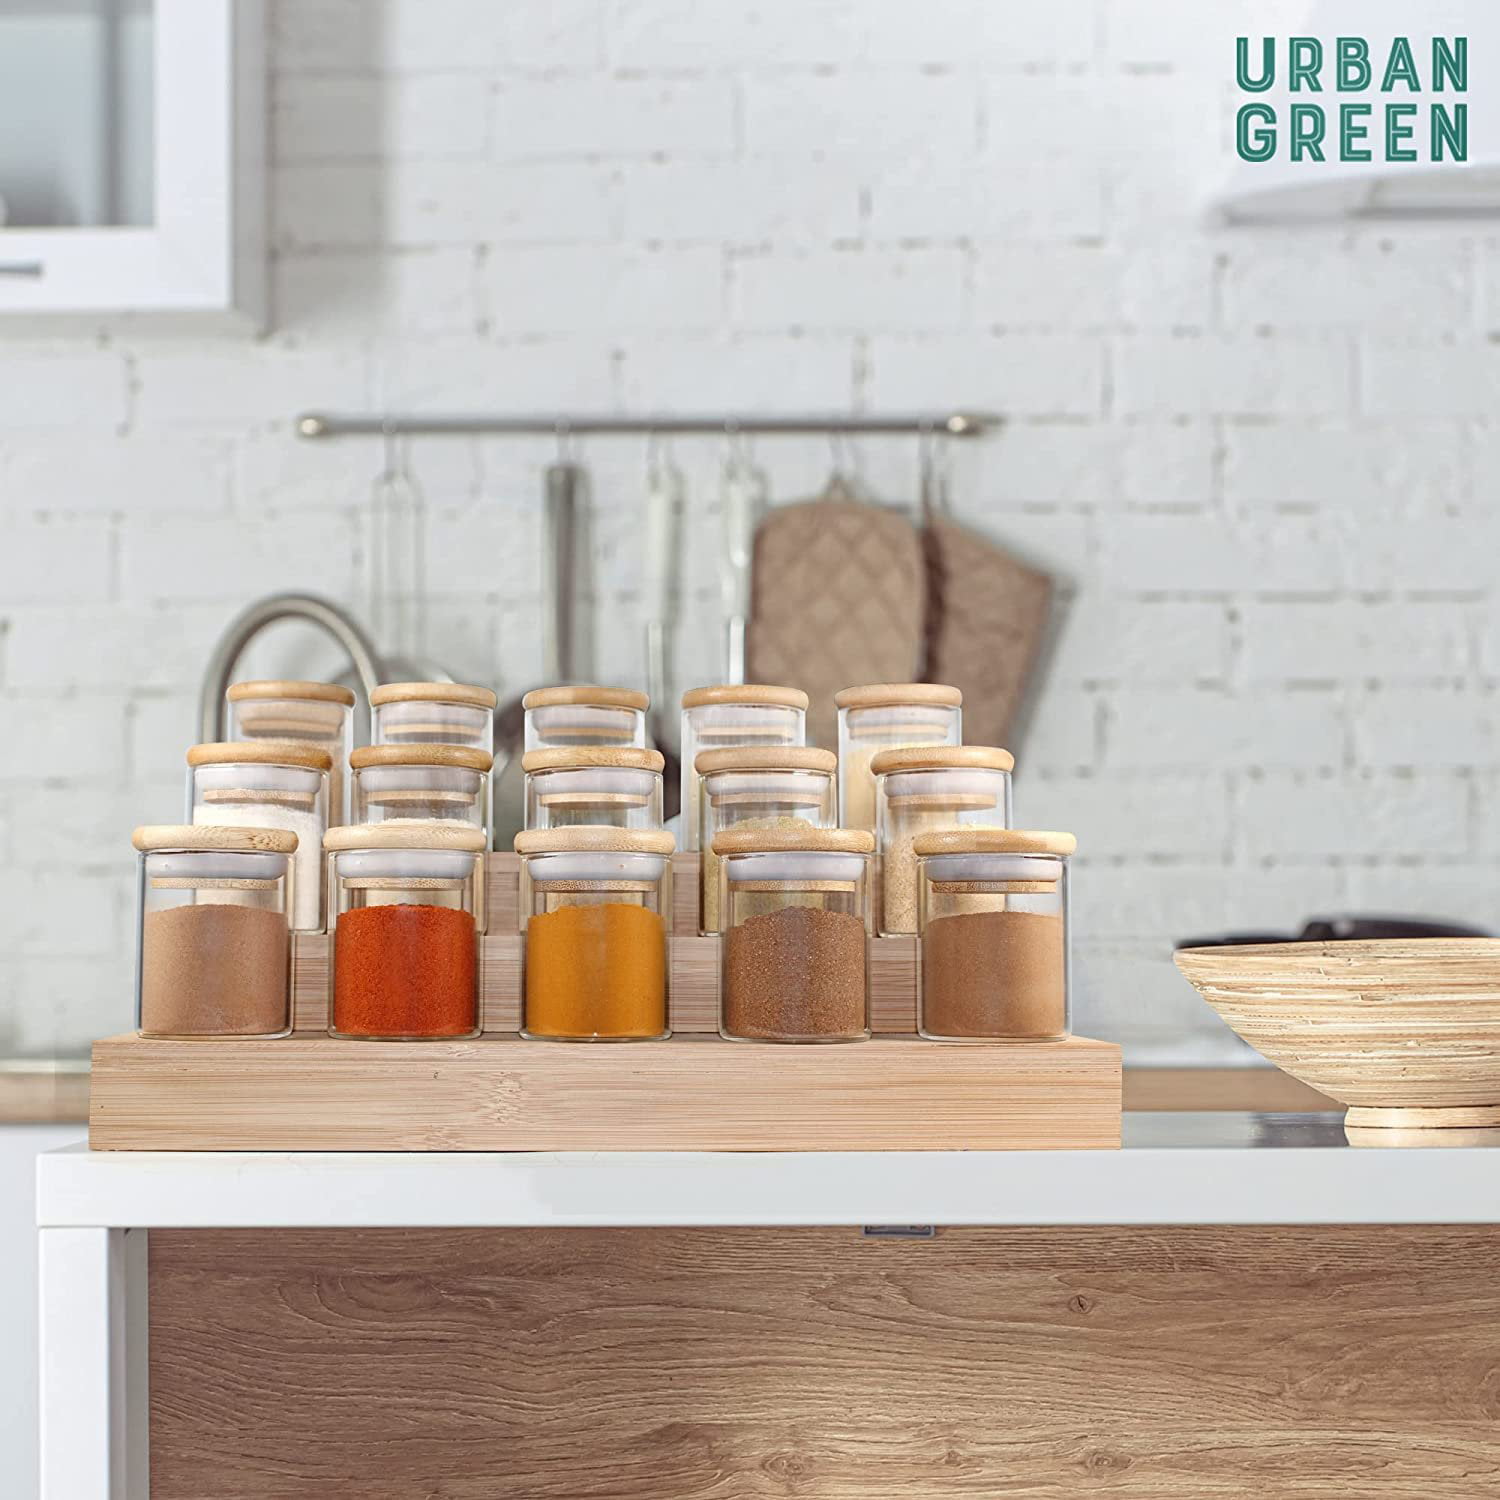 URBAN GREEN Glass Jar With Bamboo Lids Urban Green, Airtight Food Storage  Containers, Flour Pantry (52 Oz - 2Pcs)